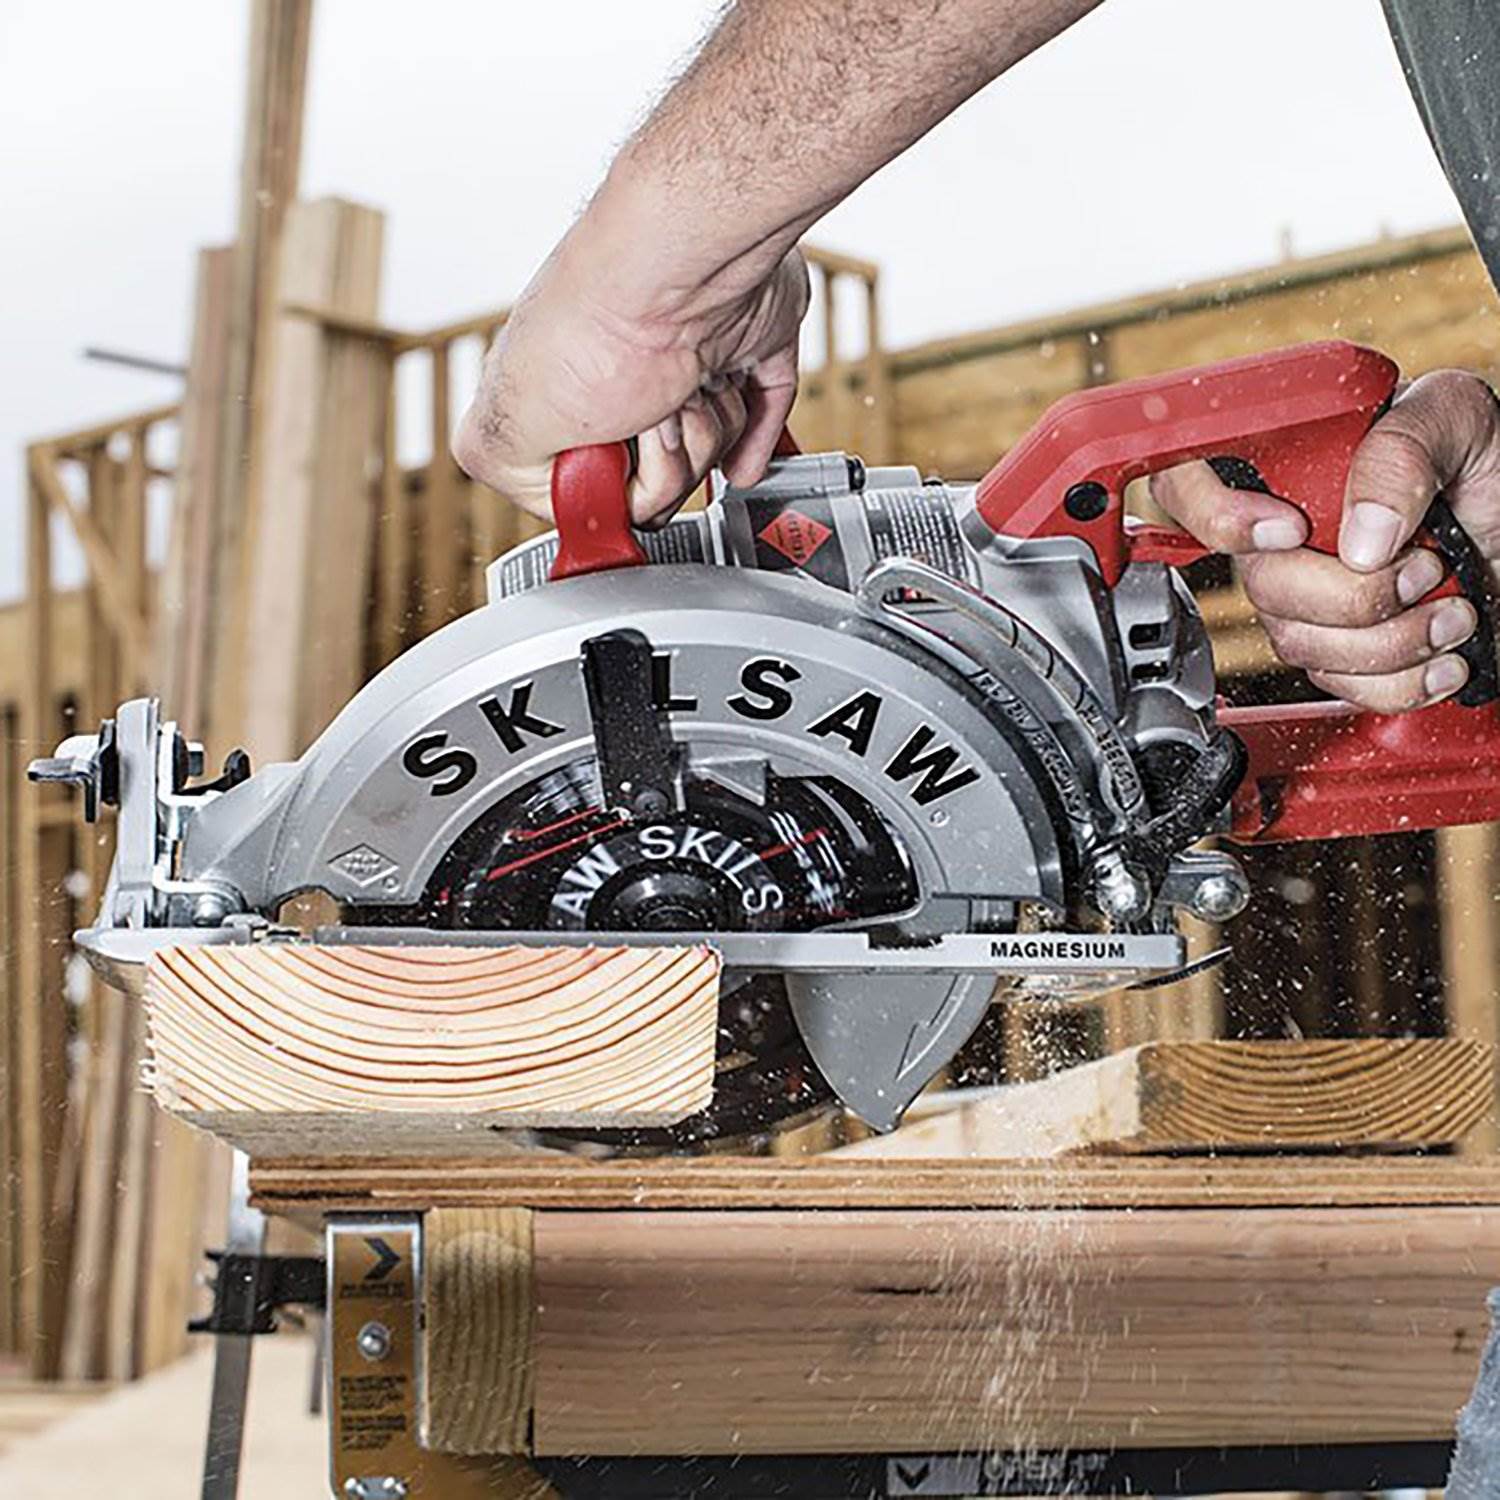 Skilsaw 7-1/4" Lightweight 15A Corded Magnesium Worm Drive Circular Saw 